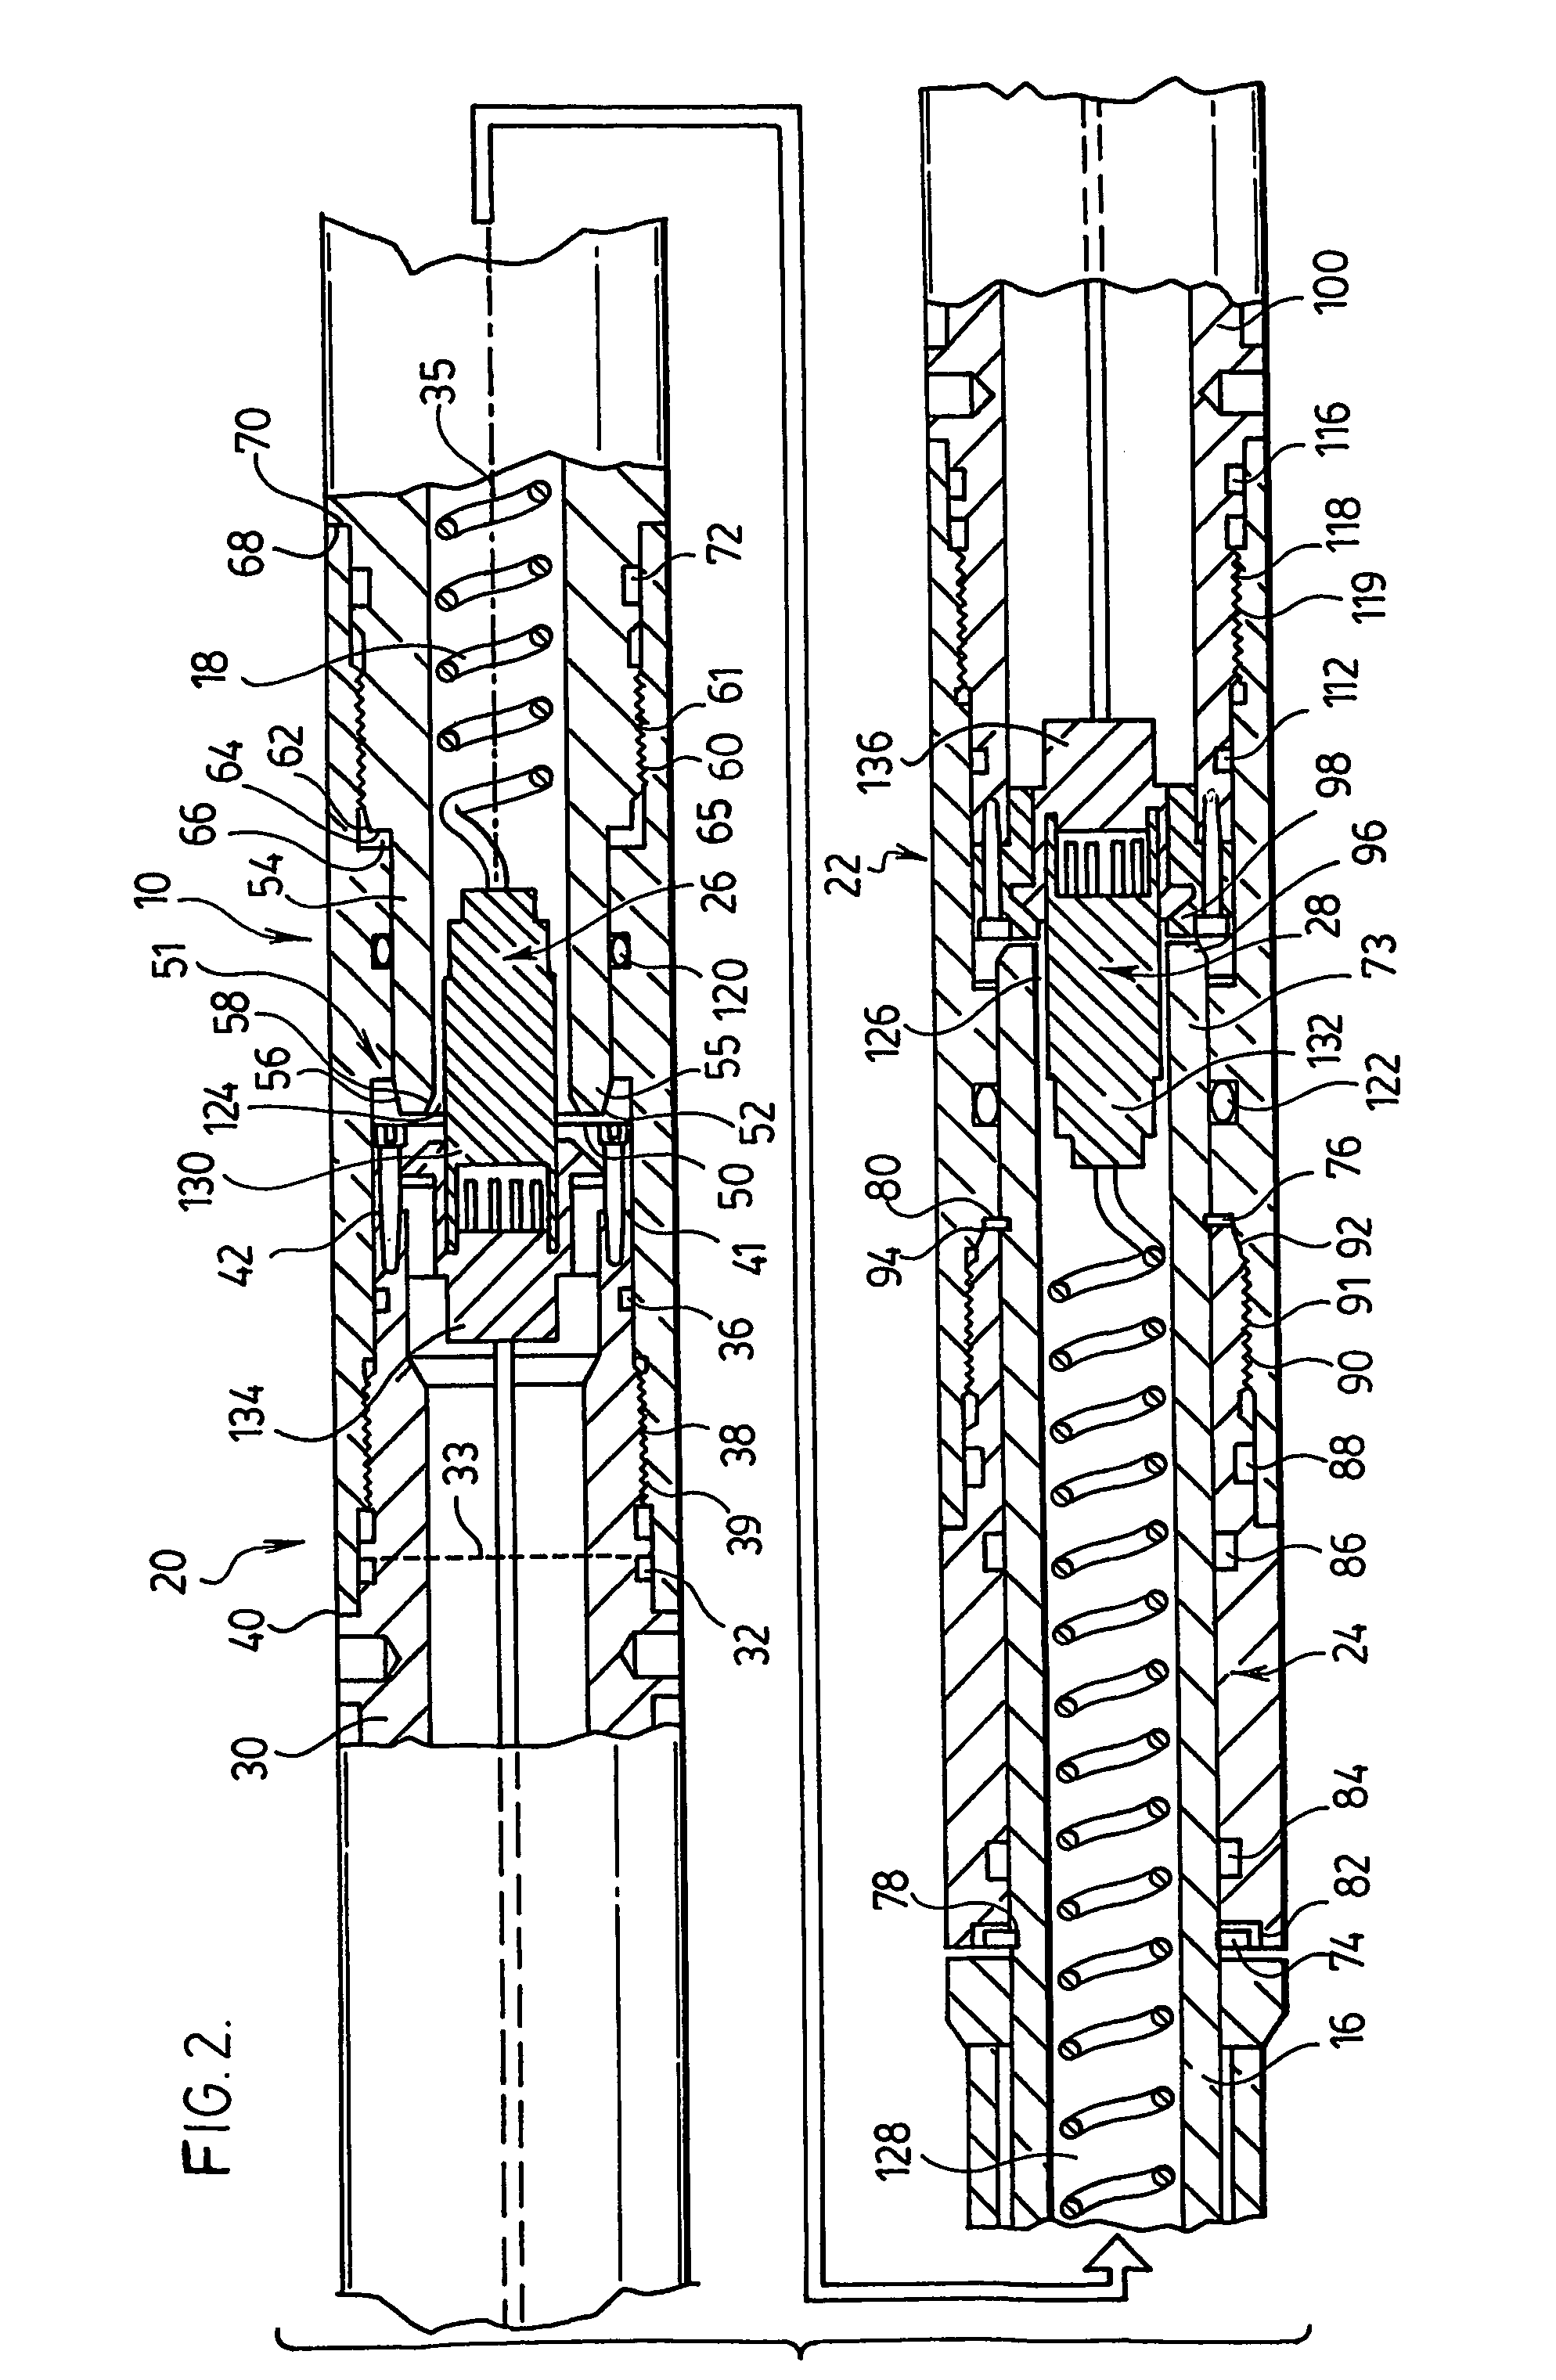 Tool module connector for use in directional drilling